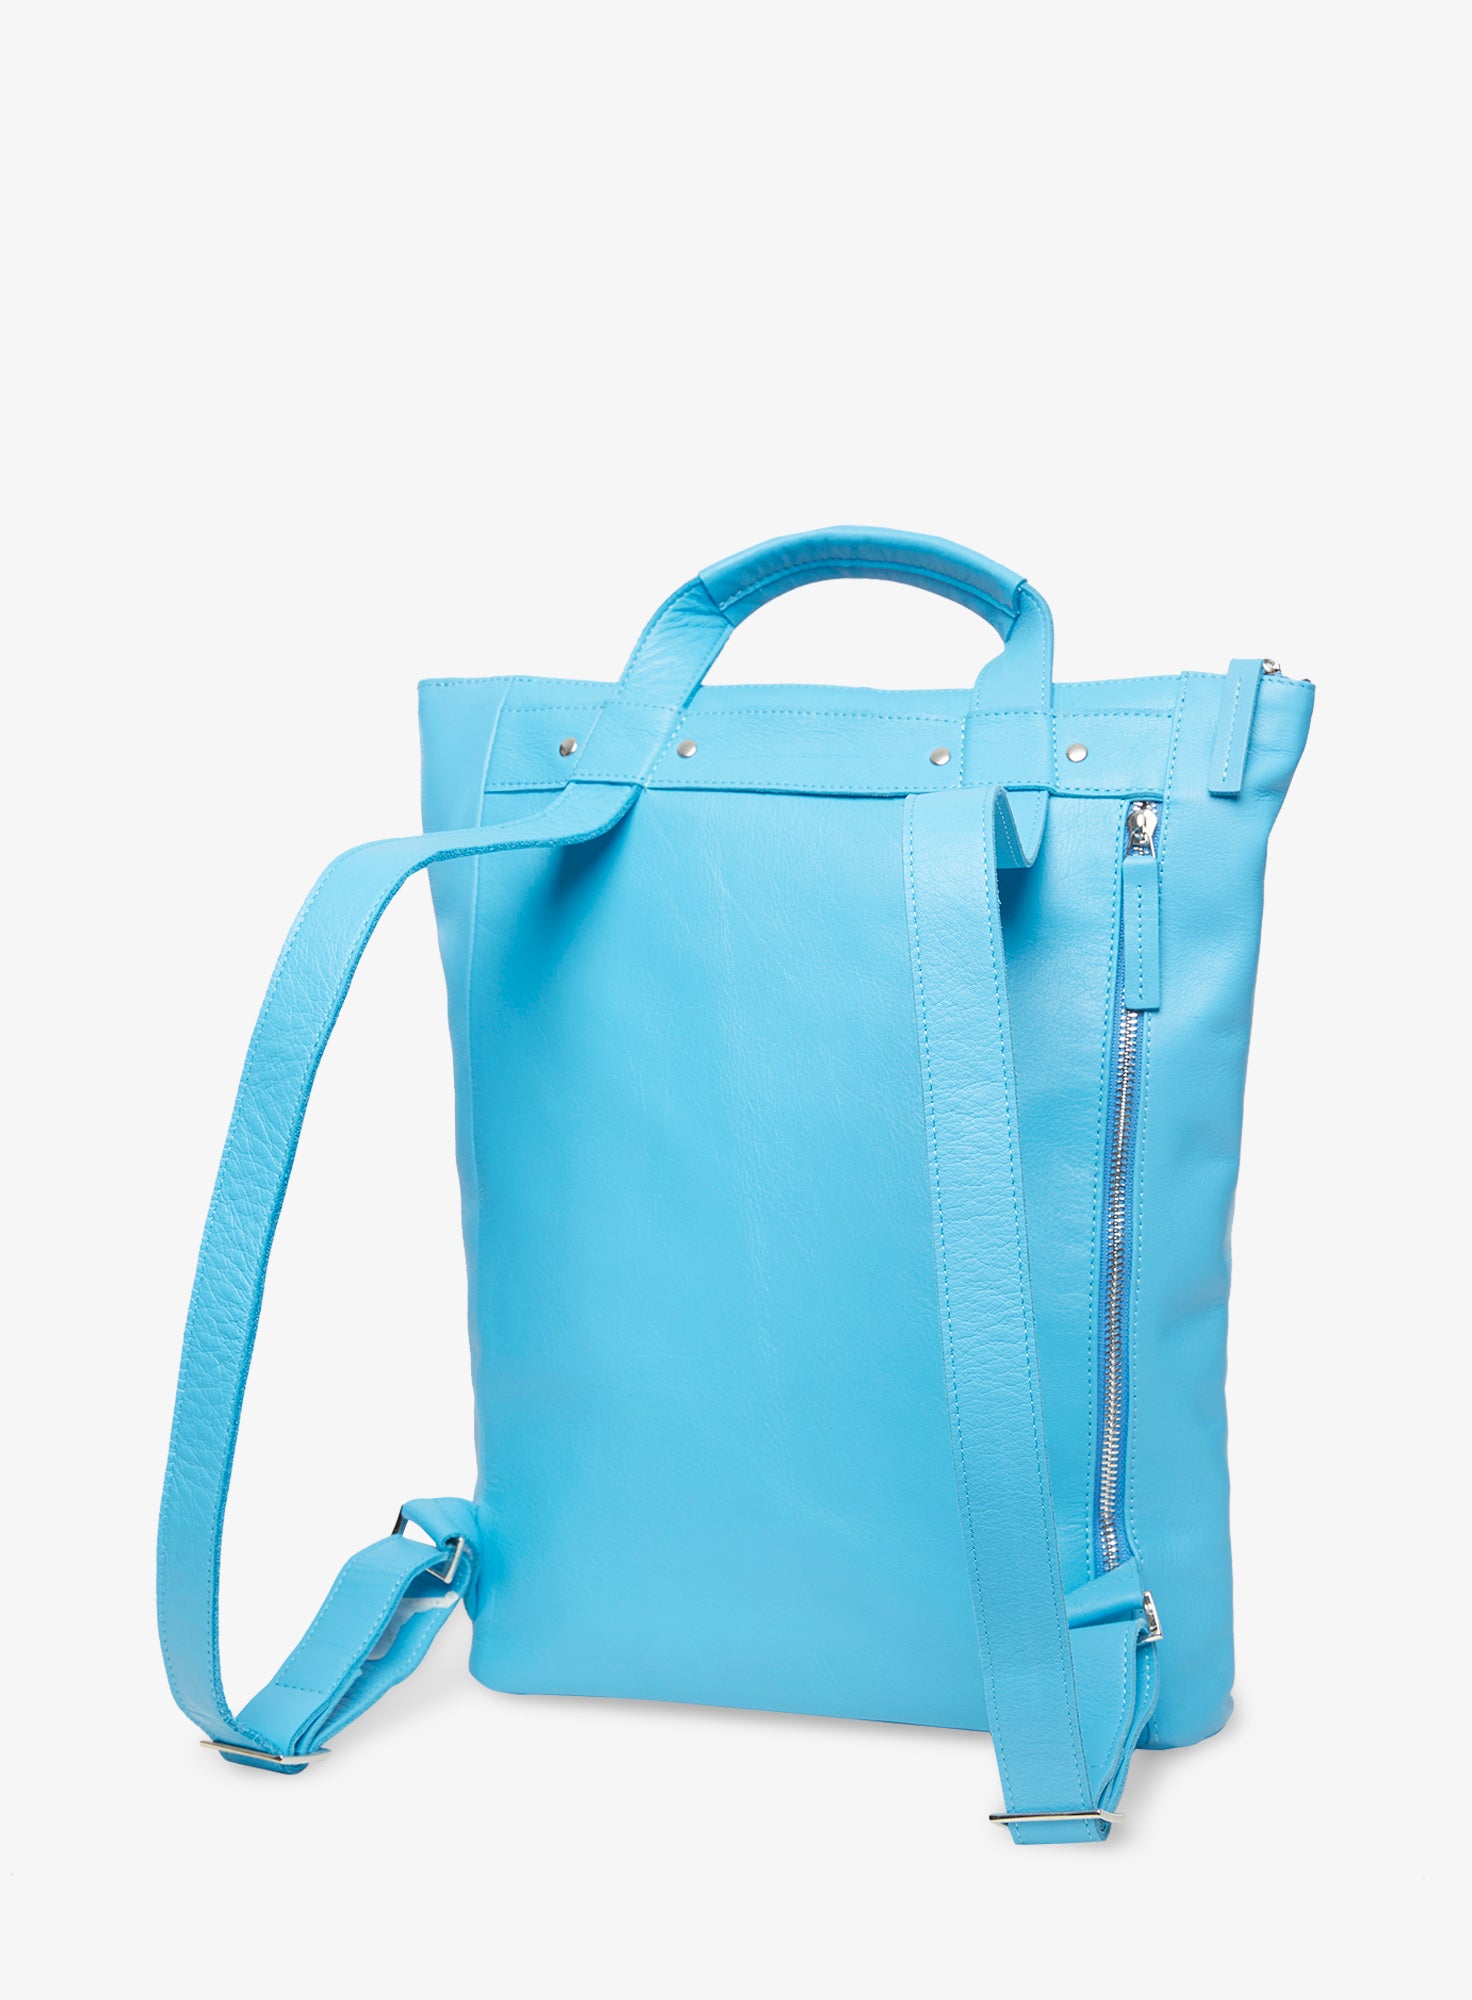 TOTE_BACKPACK_ELLIOT_NAPPA_BLUE_Designed_in_Berlin_Made_to_last_Handmade_in_Poland.